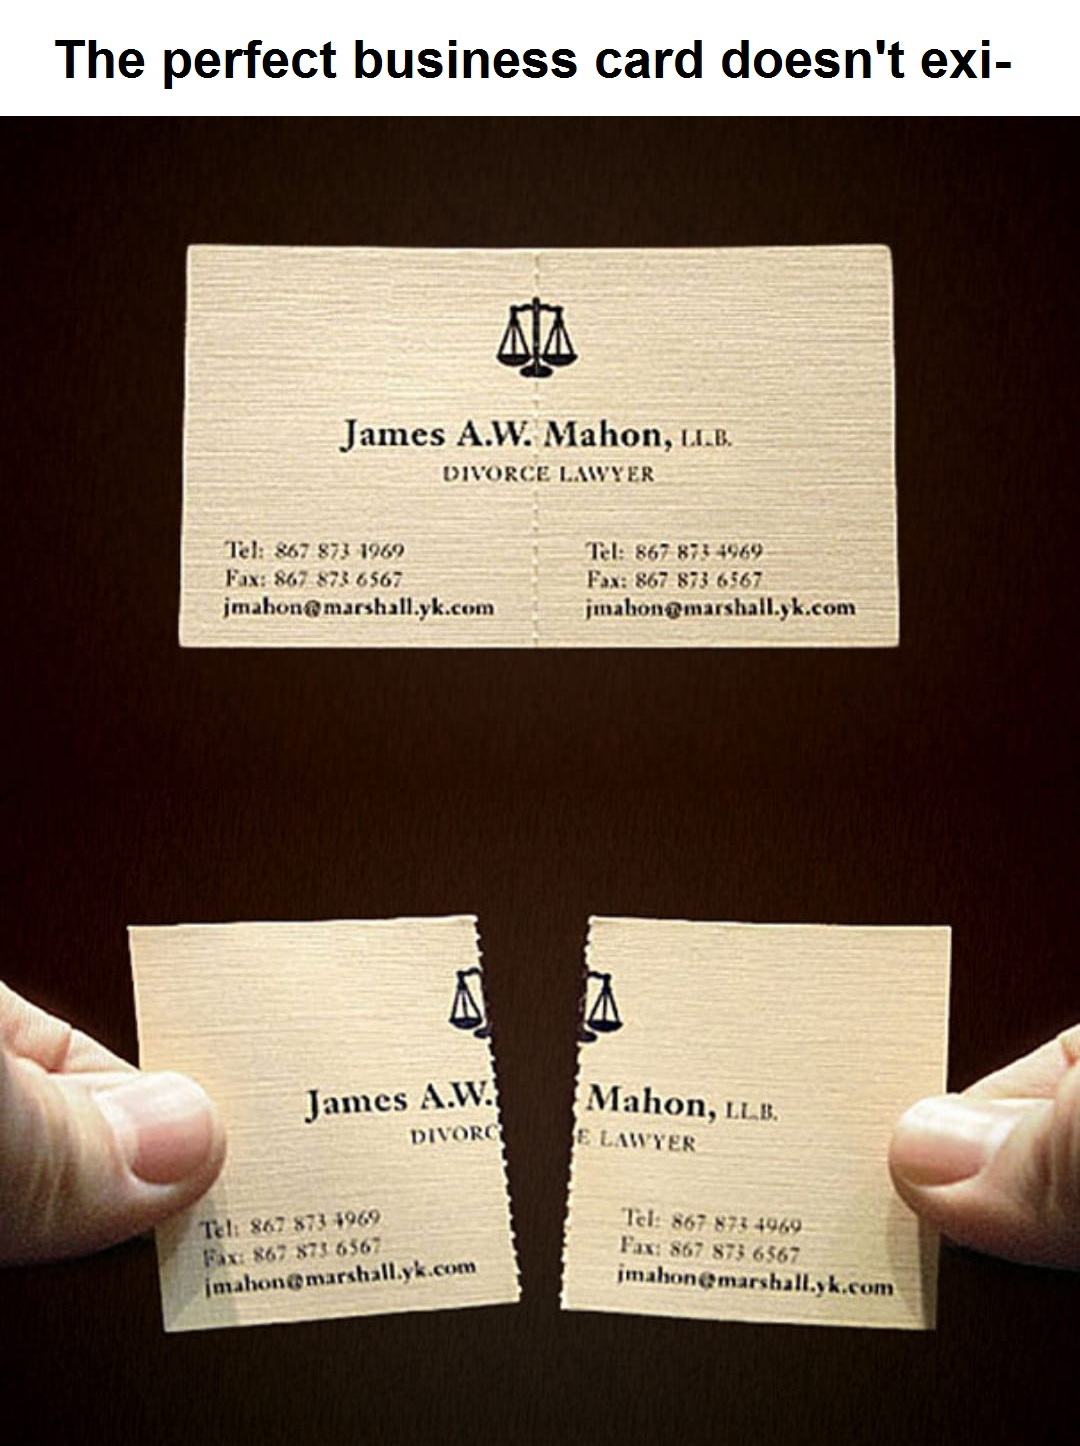 divorce lawyer business card - The perfect business card doesn't exi Mz James A.W. Mahon, les Divorce Lawyer Tel2679 Fax 67 236567 mahon marshall.yk.com Tl 6 14 Fax 867 73 6567 jahon marshall.com James A.W. Mahon, Lawyer Divorce T67373 Pix 861667 mon mars